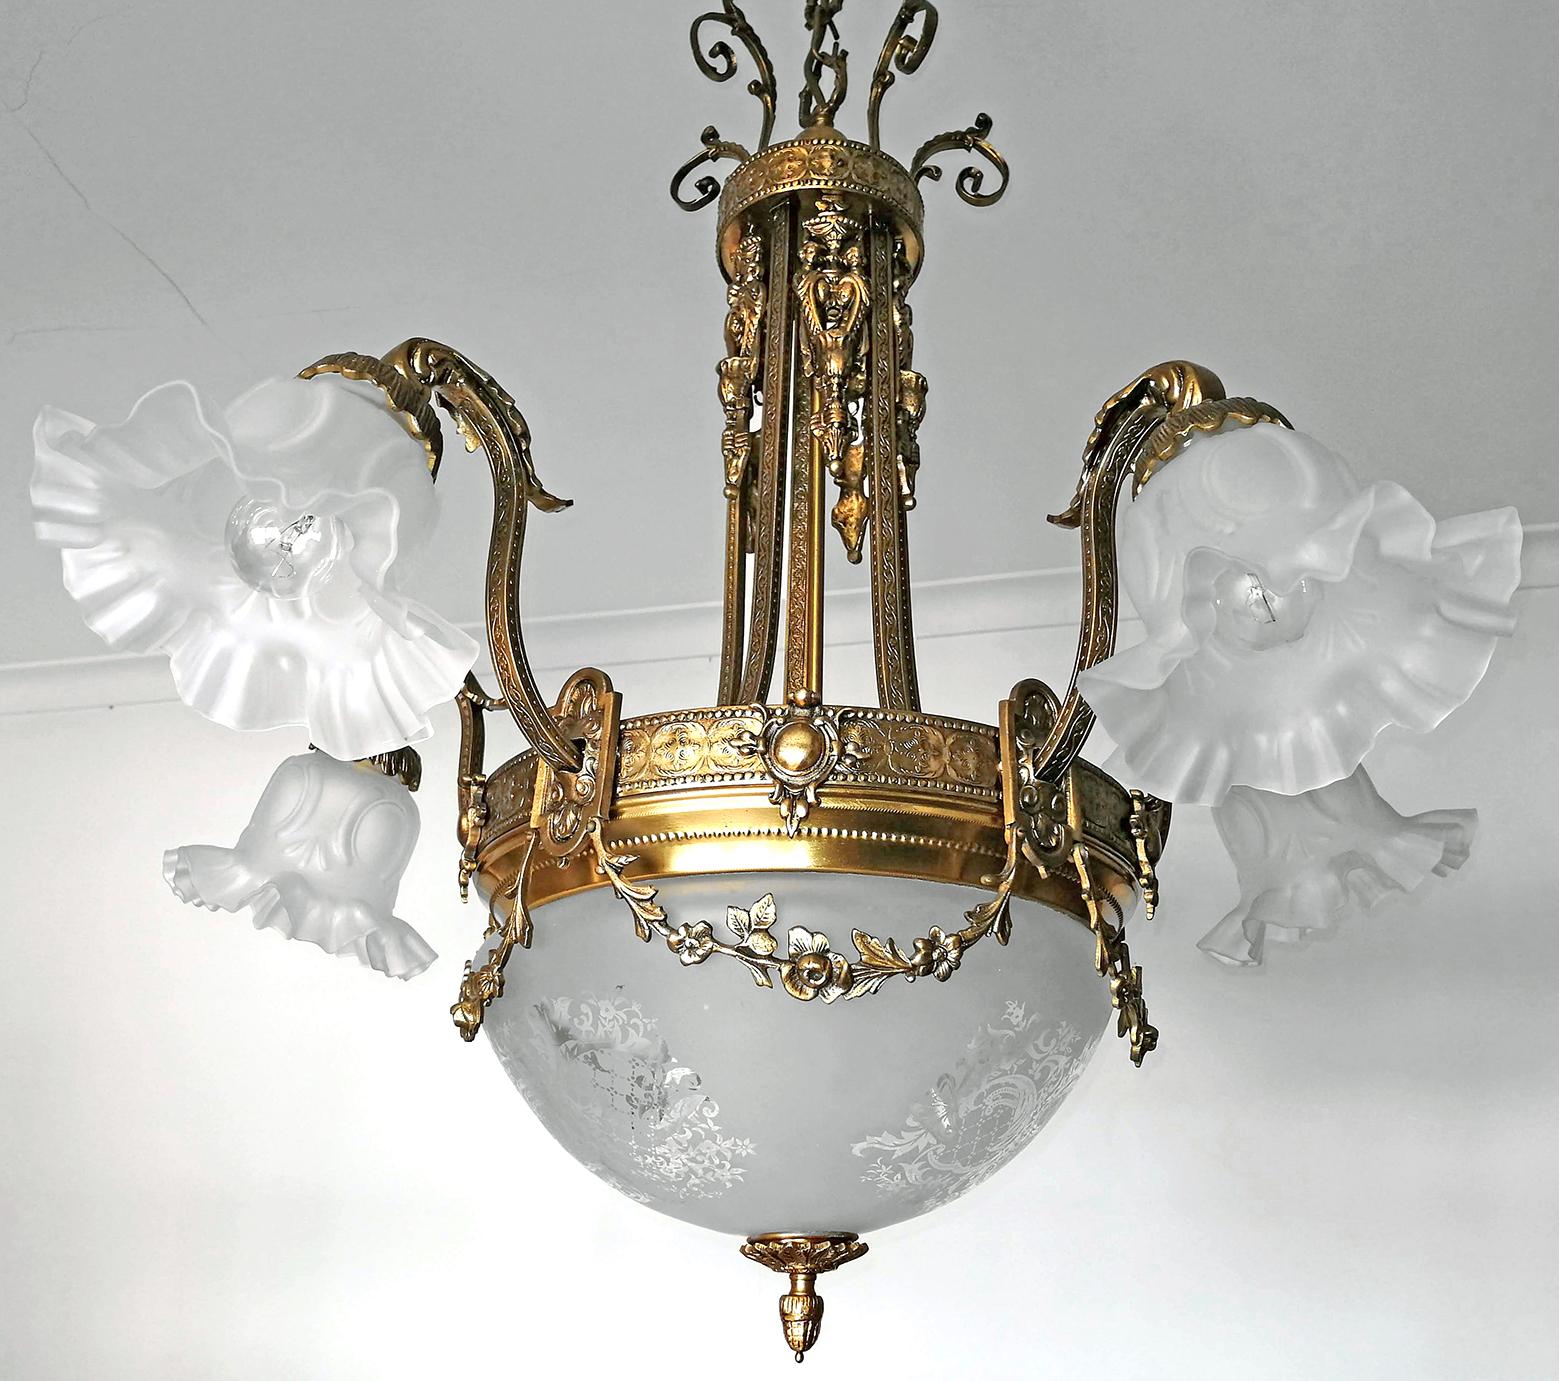 A wonderful gilt bronze and etched-glass 8-light ceiling fixture decorated with fine ornaments and garlands, France, early 20th century.
Measures:
Diameter 31.8 in/ 80 cm
Height 41.5 in (chain 7.9 in)/ 105 cm (chain 20cm)
Weight 33 lb/ 15 Kg
8